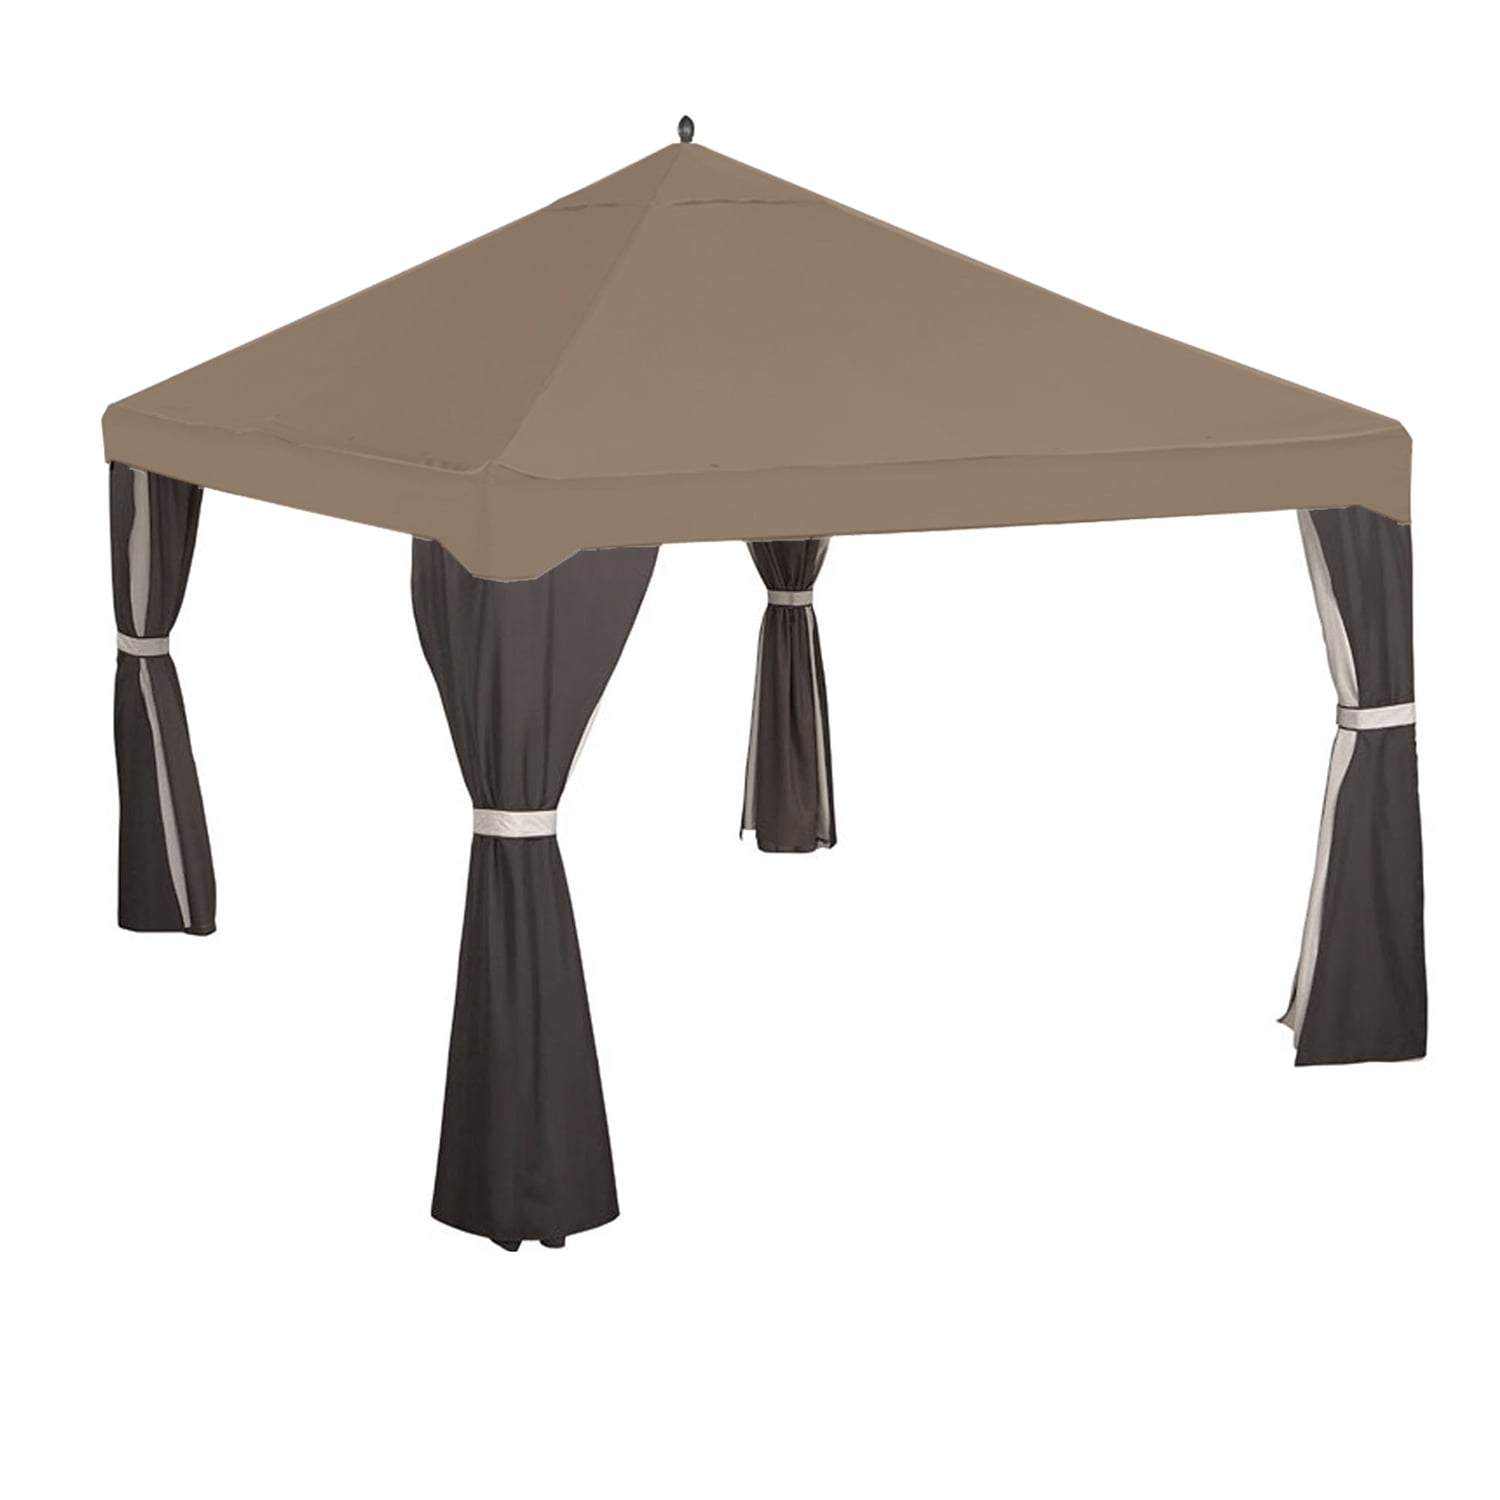 Garden Winds Replacement Canopy Top Cover for the 12x10 Crescent Gazebo RipLock 350 Accessories